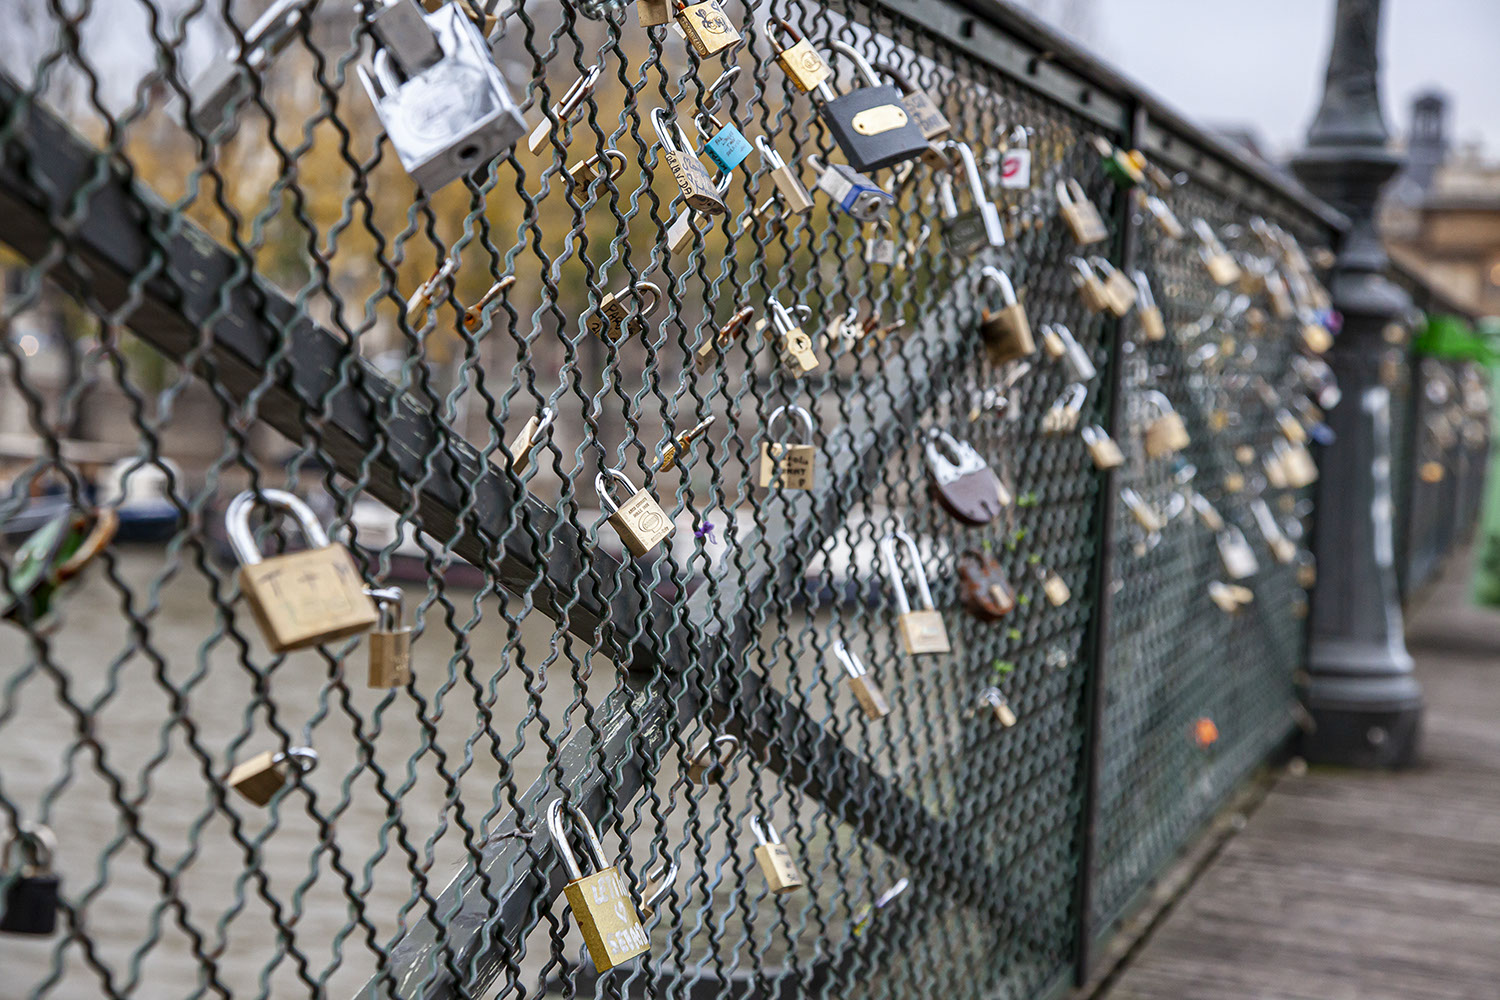 Bridge over River Seine in Paris with locks fixed there by lovers.